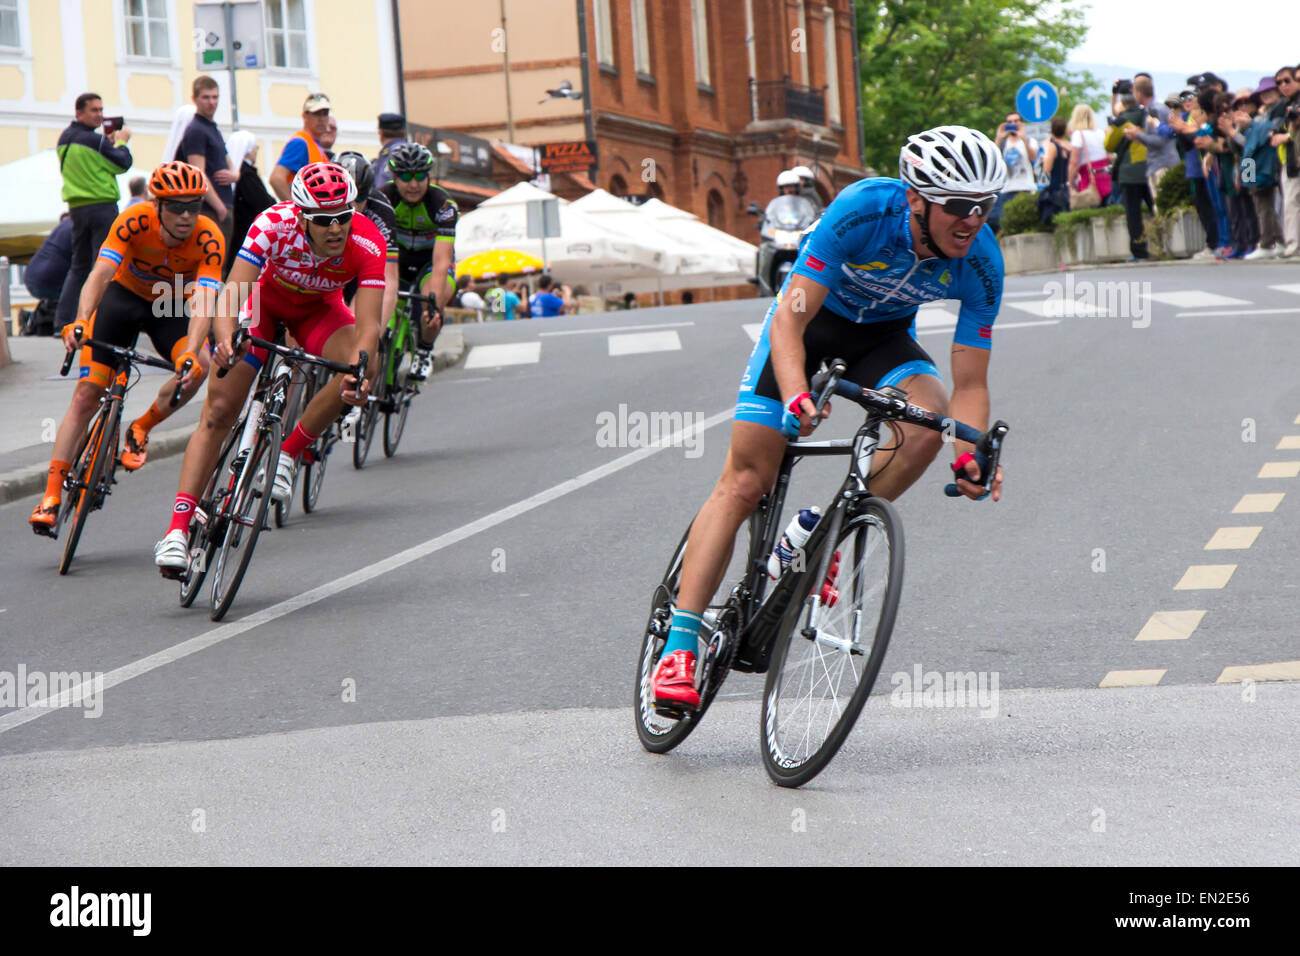 Zagreb, Croatia - April 26, 2015: The final stage of cycling race Tour of Croatia in downtown Zagreb. Stock Photo